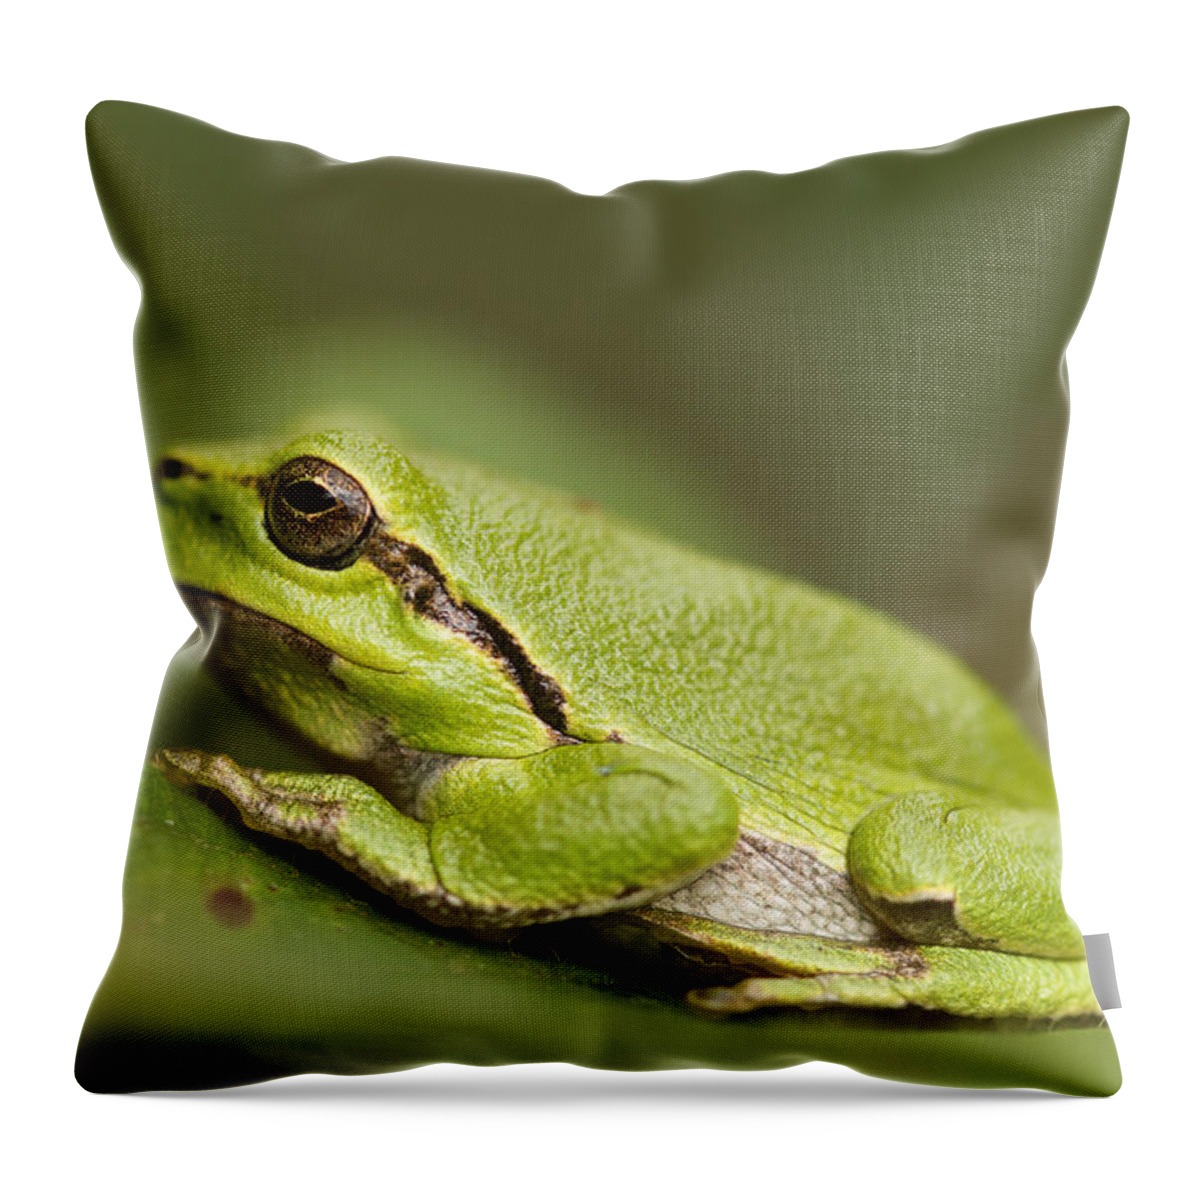 Adult Throw Pillow featuring the photograph Chilling Tree Frog by Roeselien Raimond